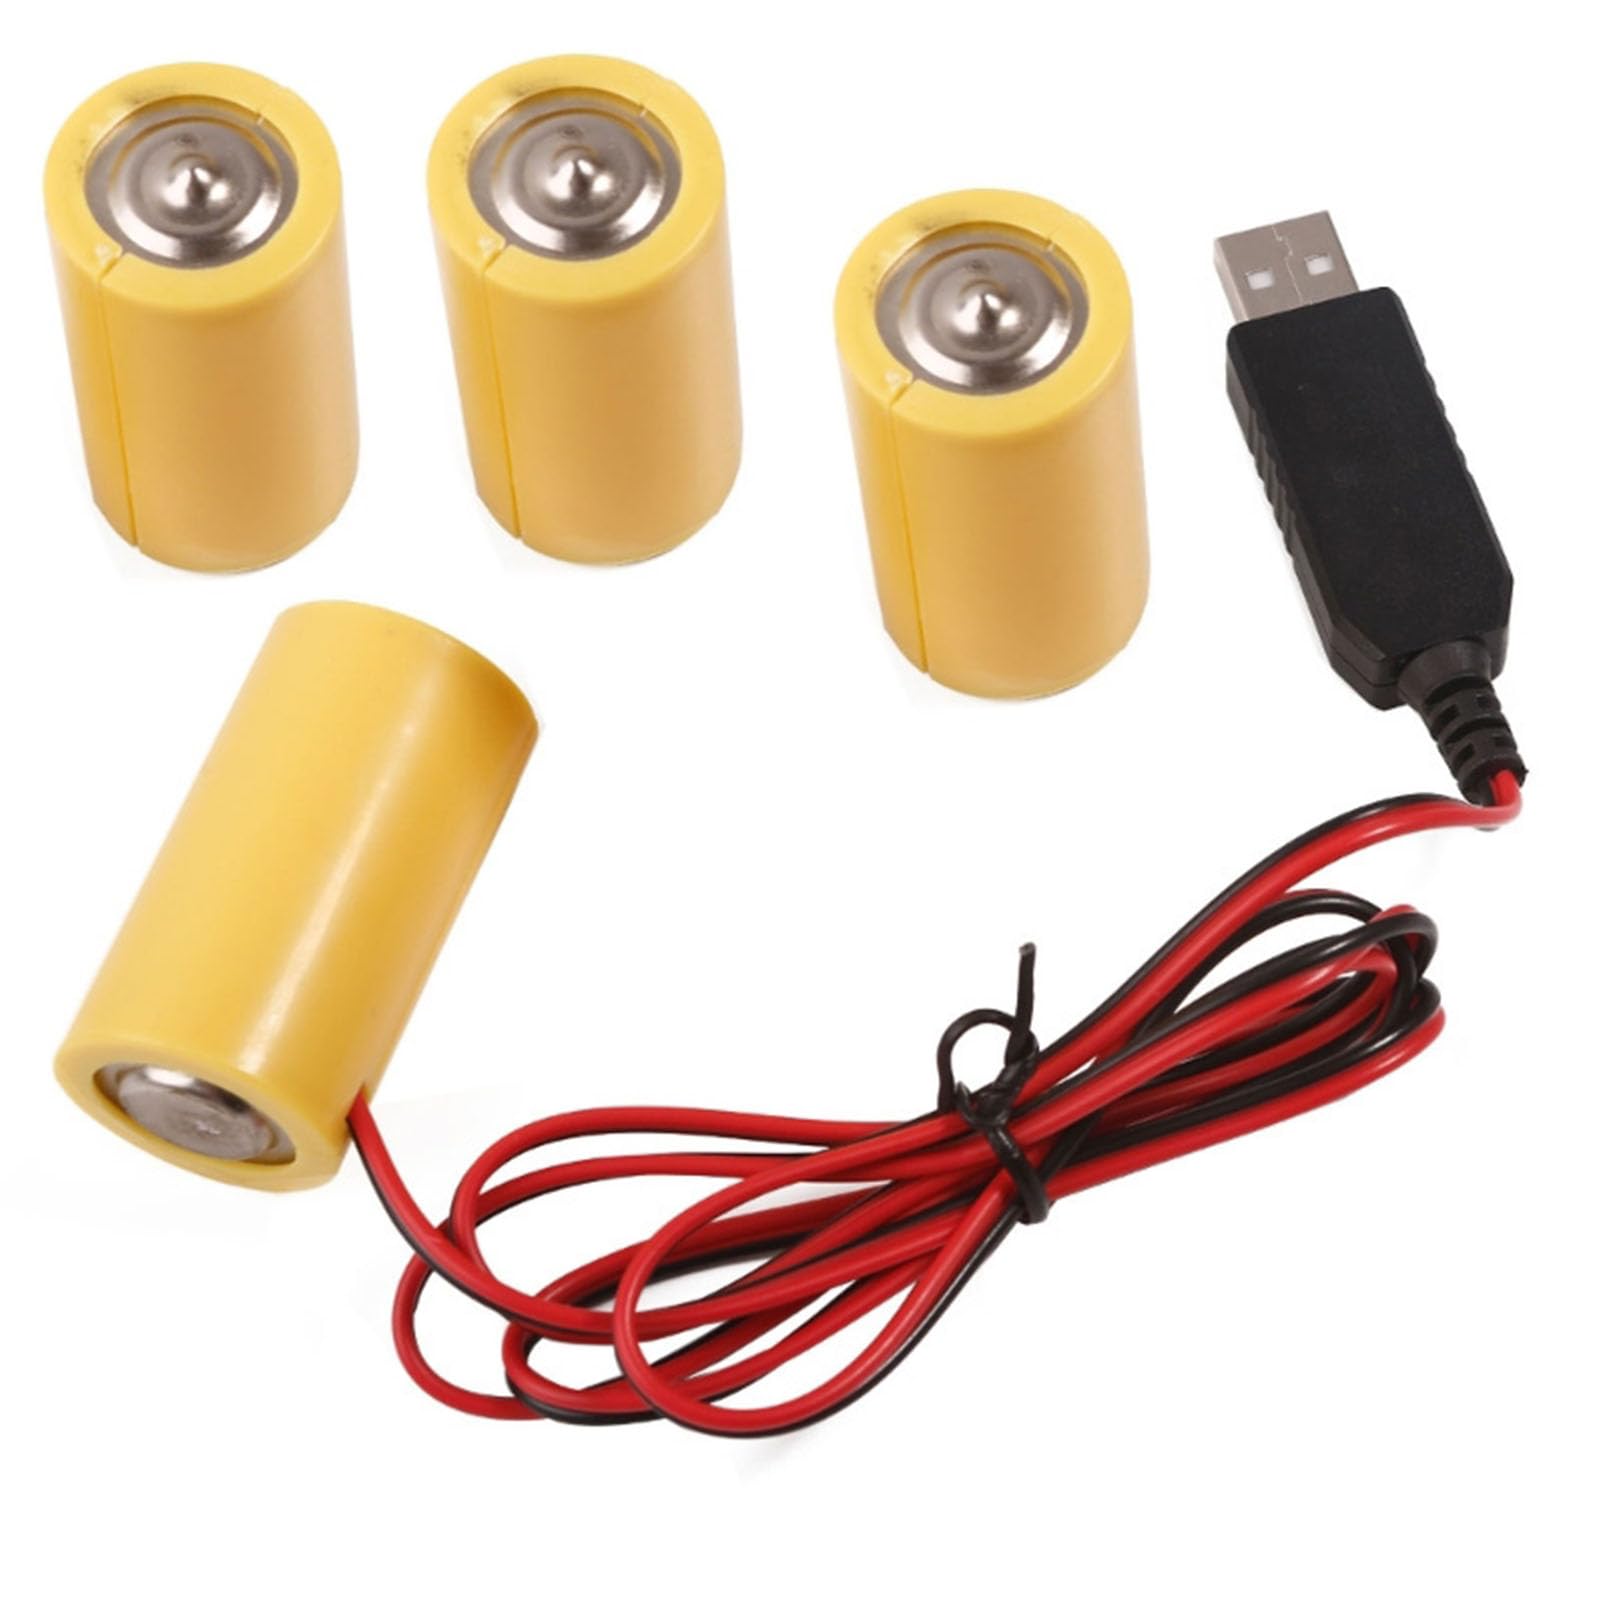 kmobruzy LR14 C Battery USB Power Supply Cable Replace 4 LR14 C Batteries Replace 4 X 1.5V Battery LR14 C Battery